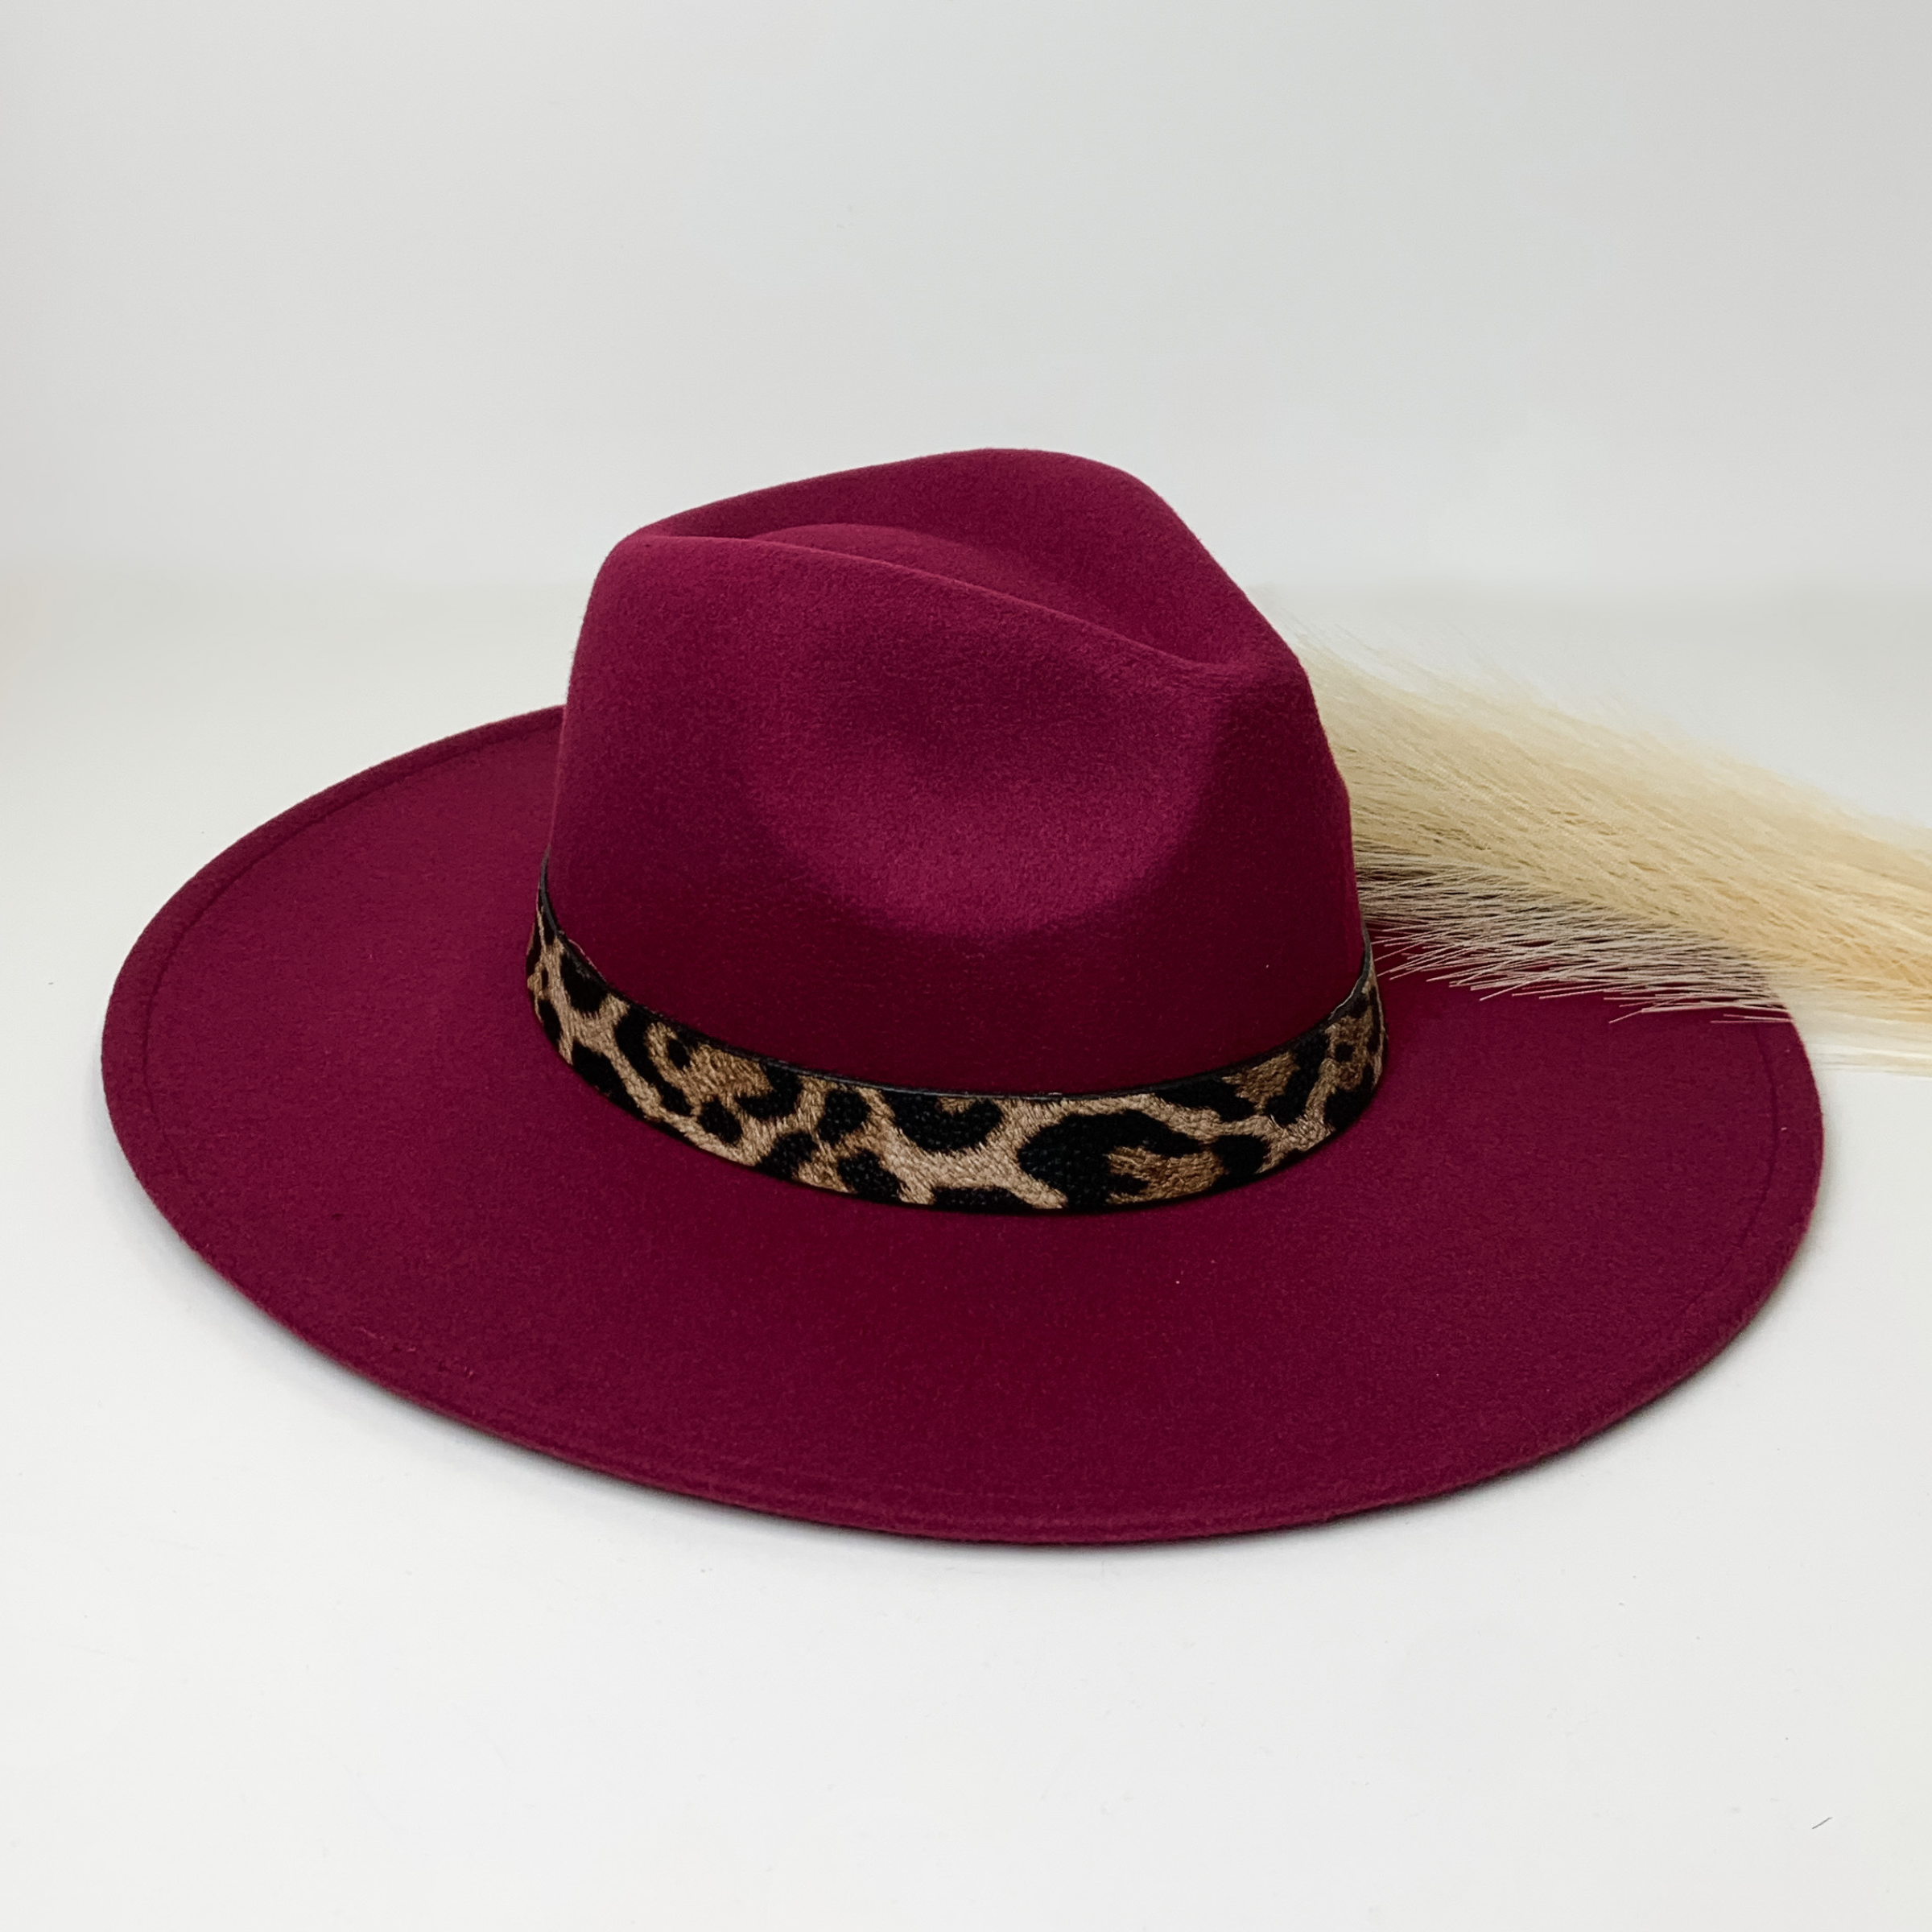 Burgundy flat brim hat with a leopard print hat bad around the crown. This hat is pictured on a white background with ivory pompous grass laying partially on the brim. 